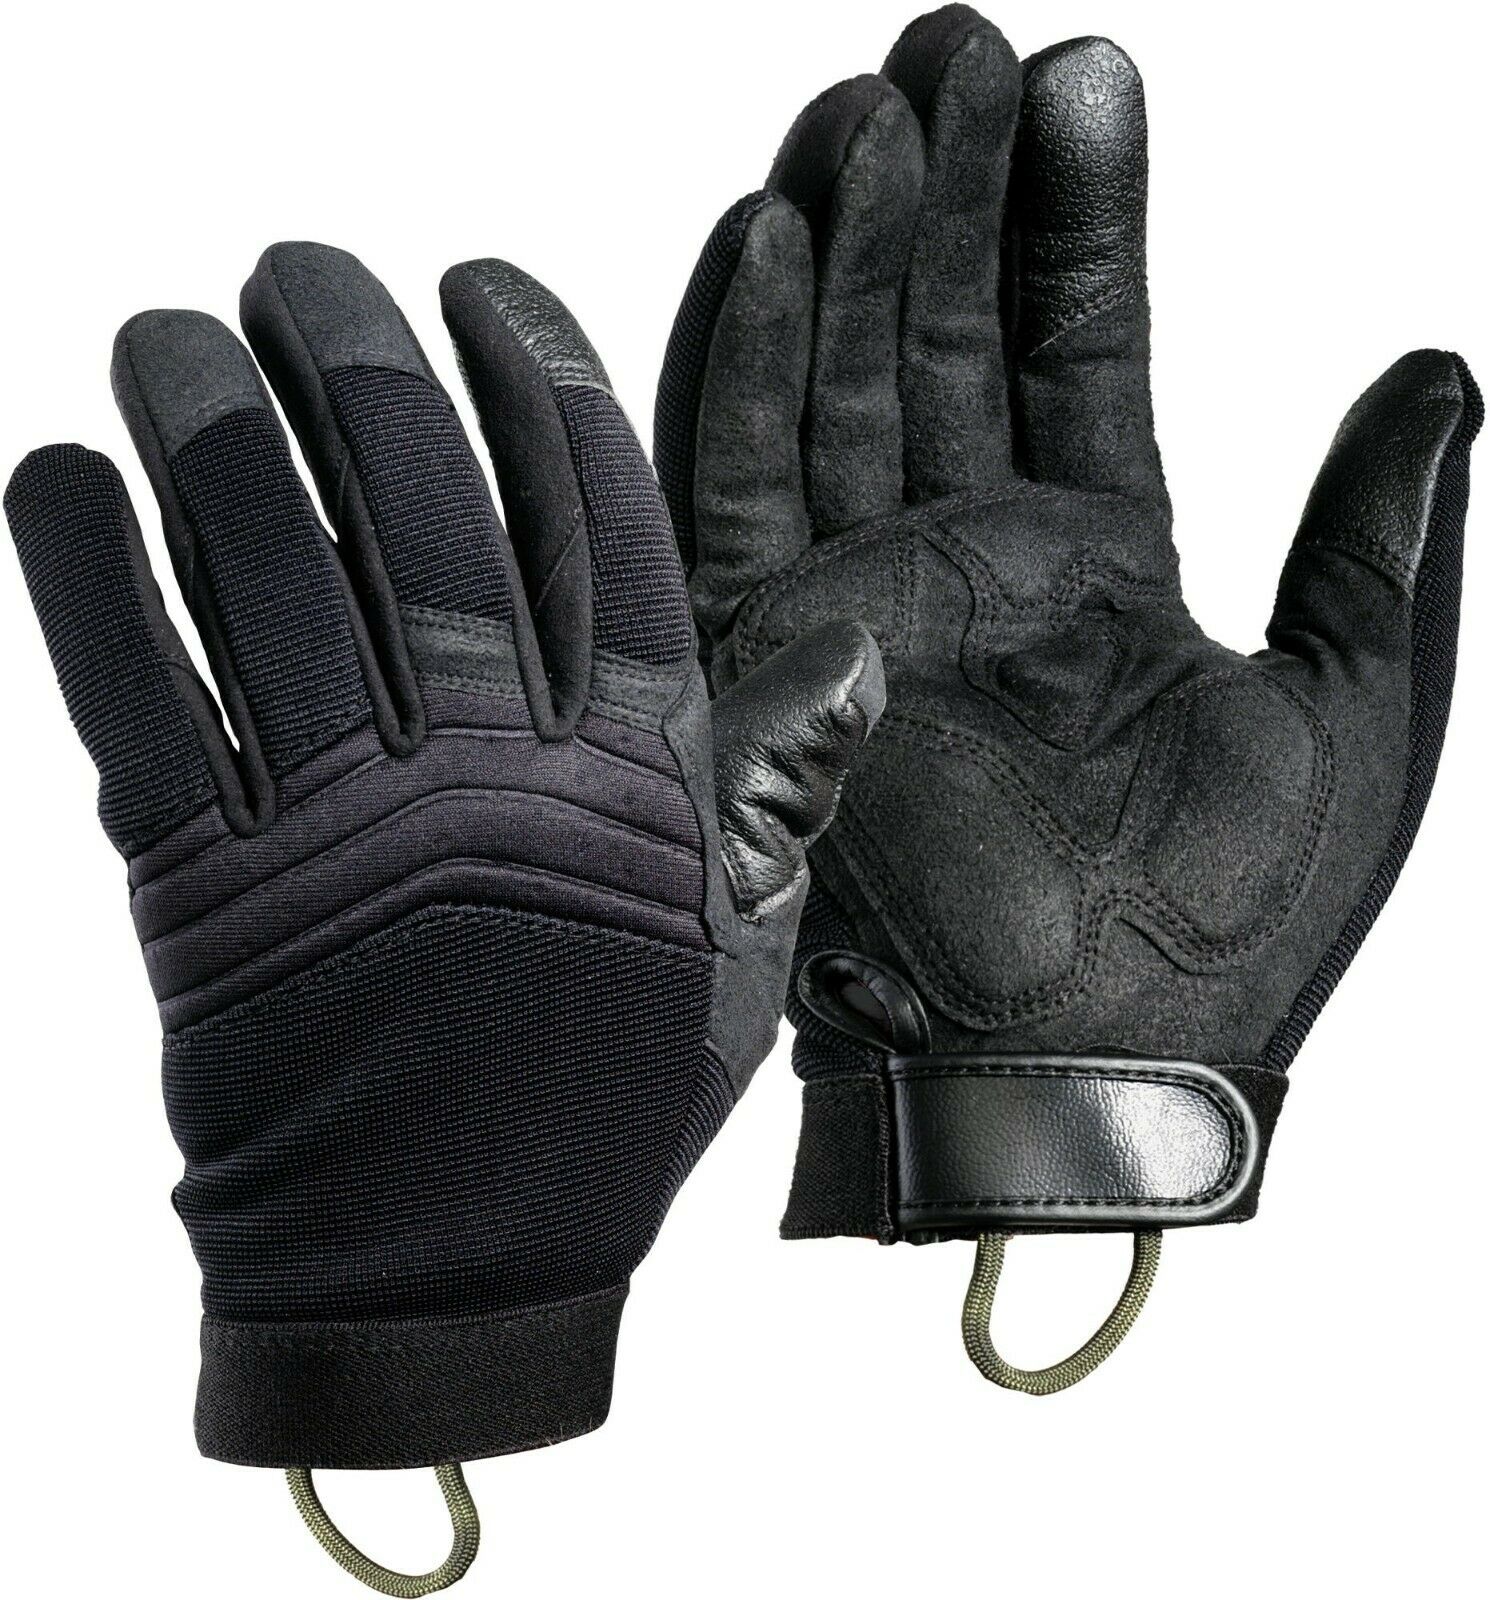 Camelbak Impact Ct Tactical Gloves Mpct05 Black All Sizes